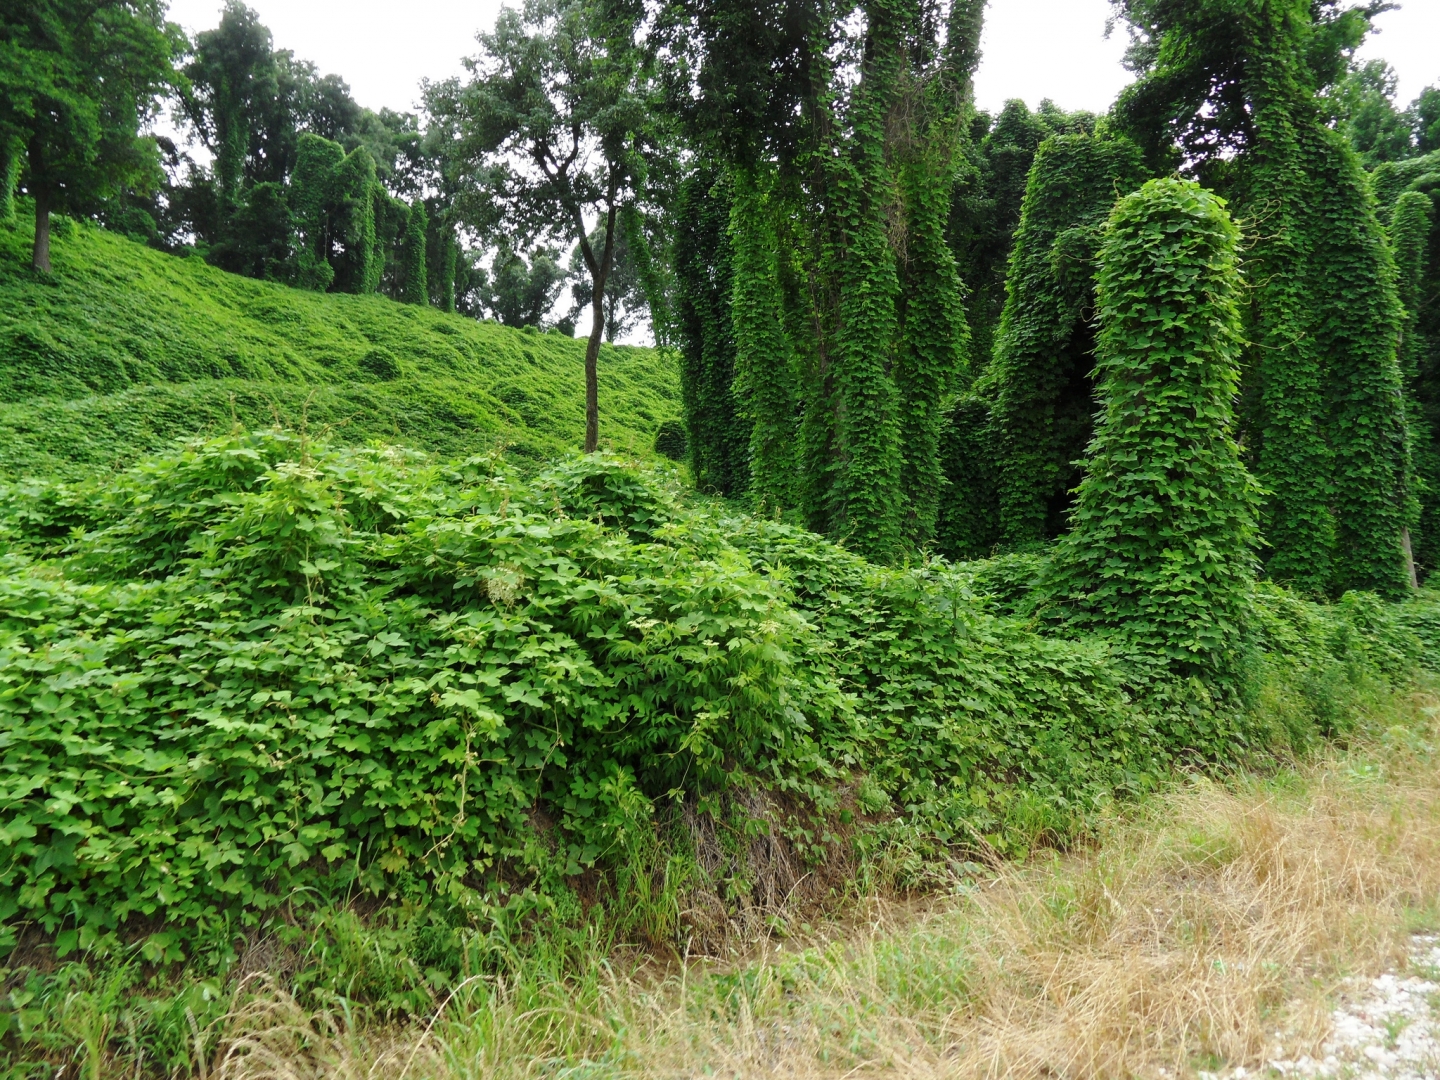 Kudzu shrouds trees and the landscape in this photo. Photo by Ken Ratcliff